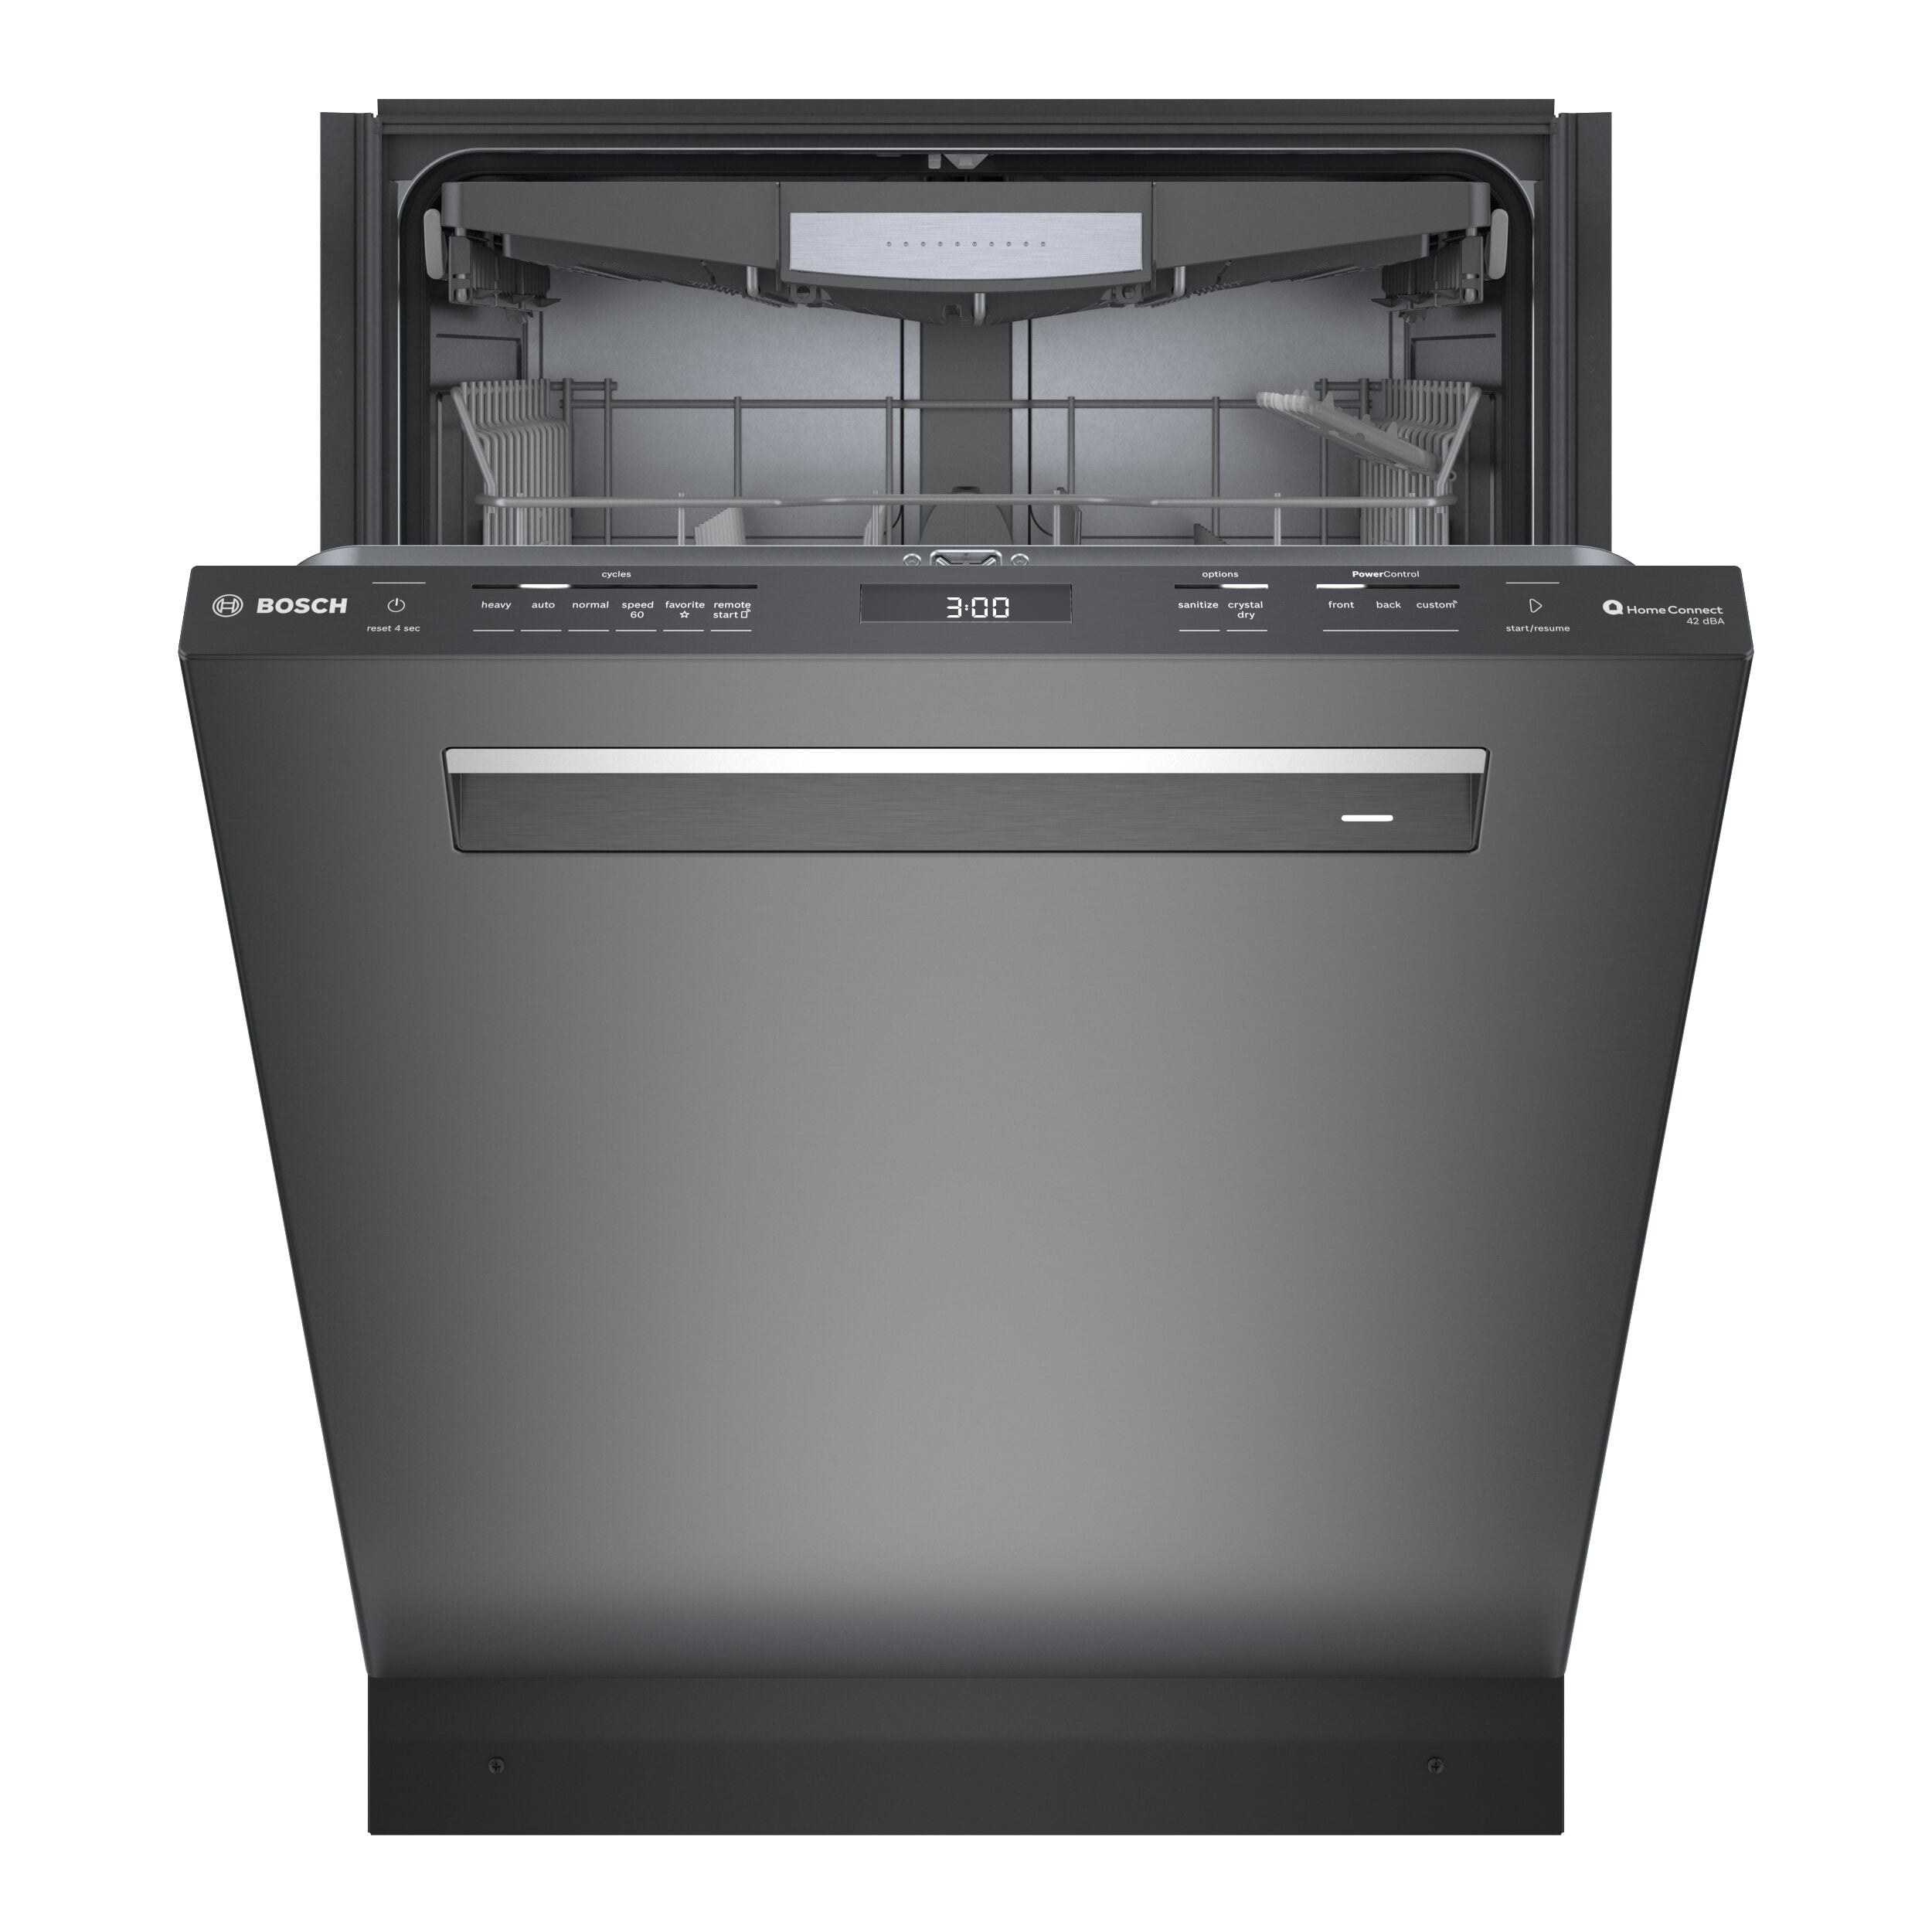 Bosch Dishwasher Cleaning Tips